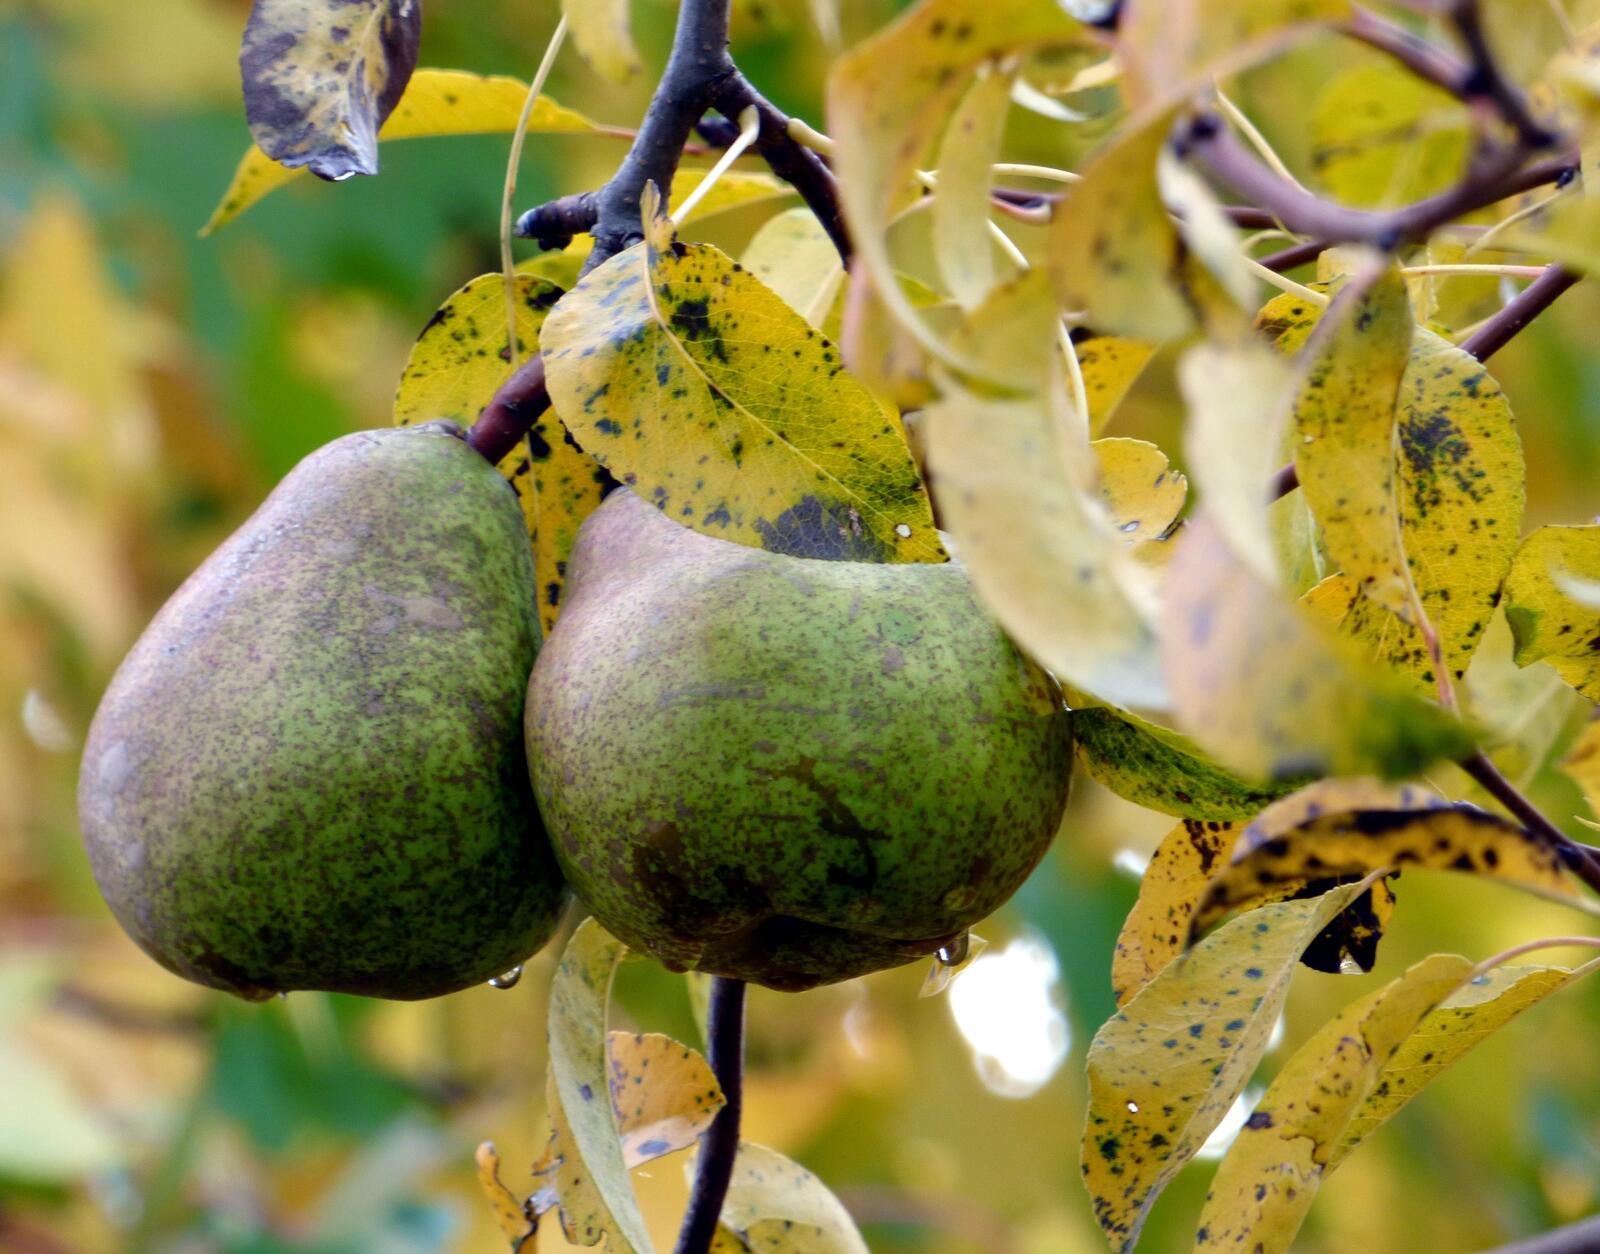 Free photo Green pears growing on a tree branch